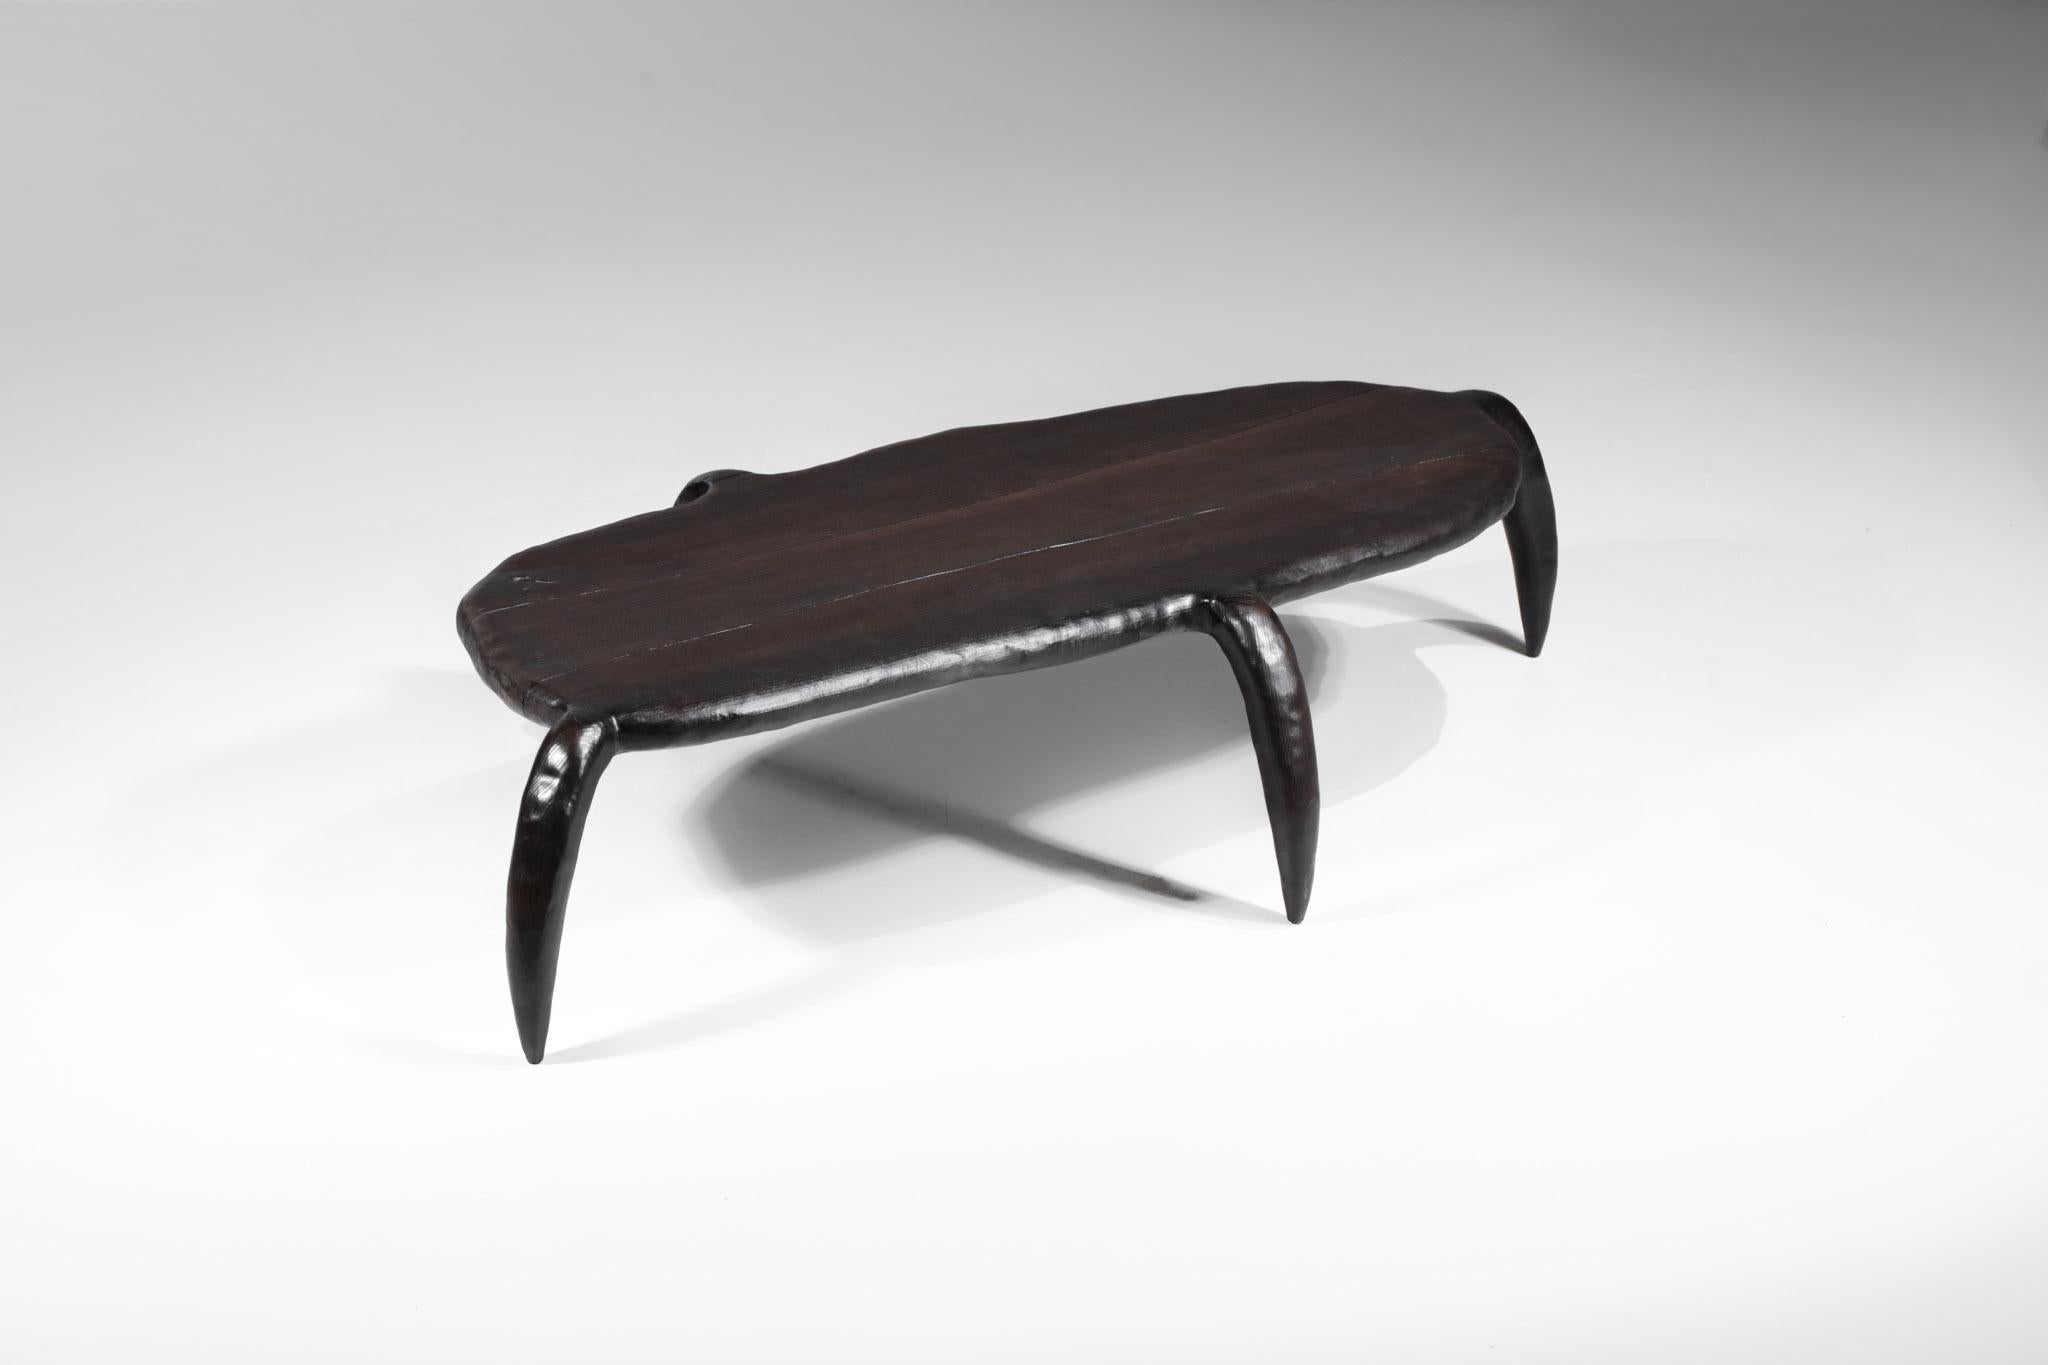 Coffee table designed and made by the cabinetmaker Vincent Vincent. This 